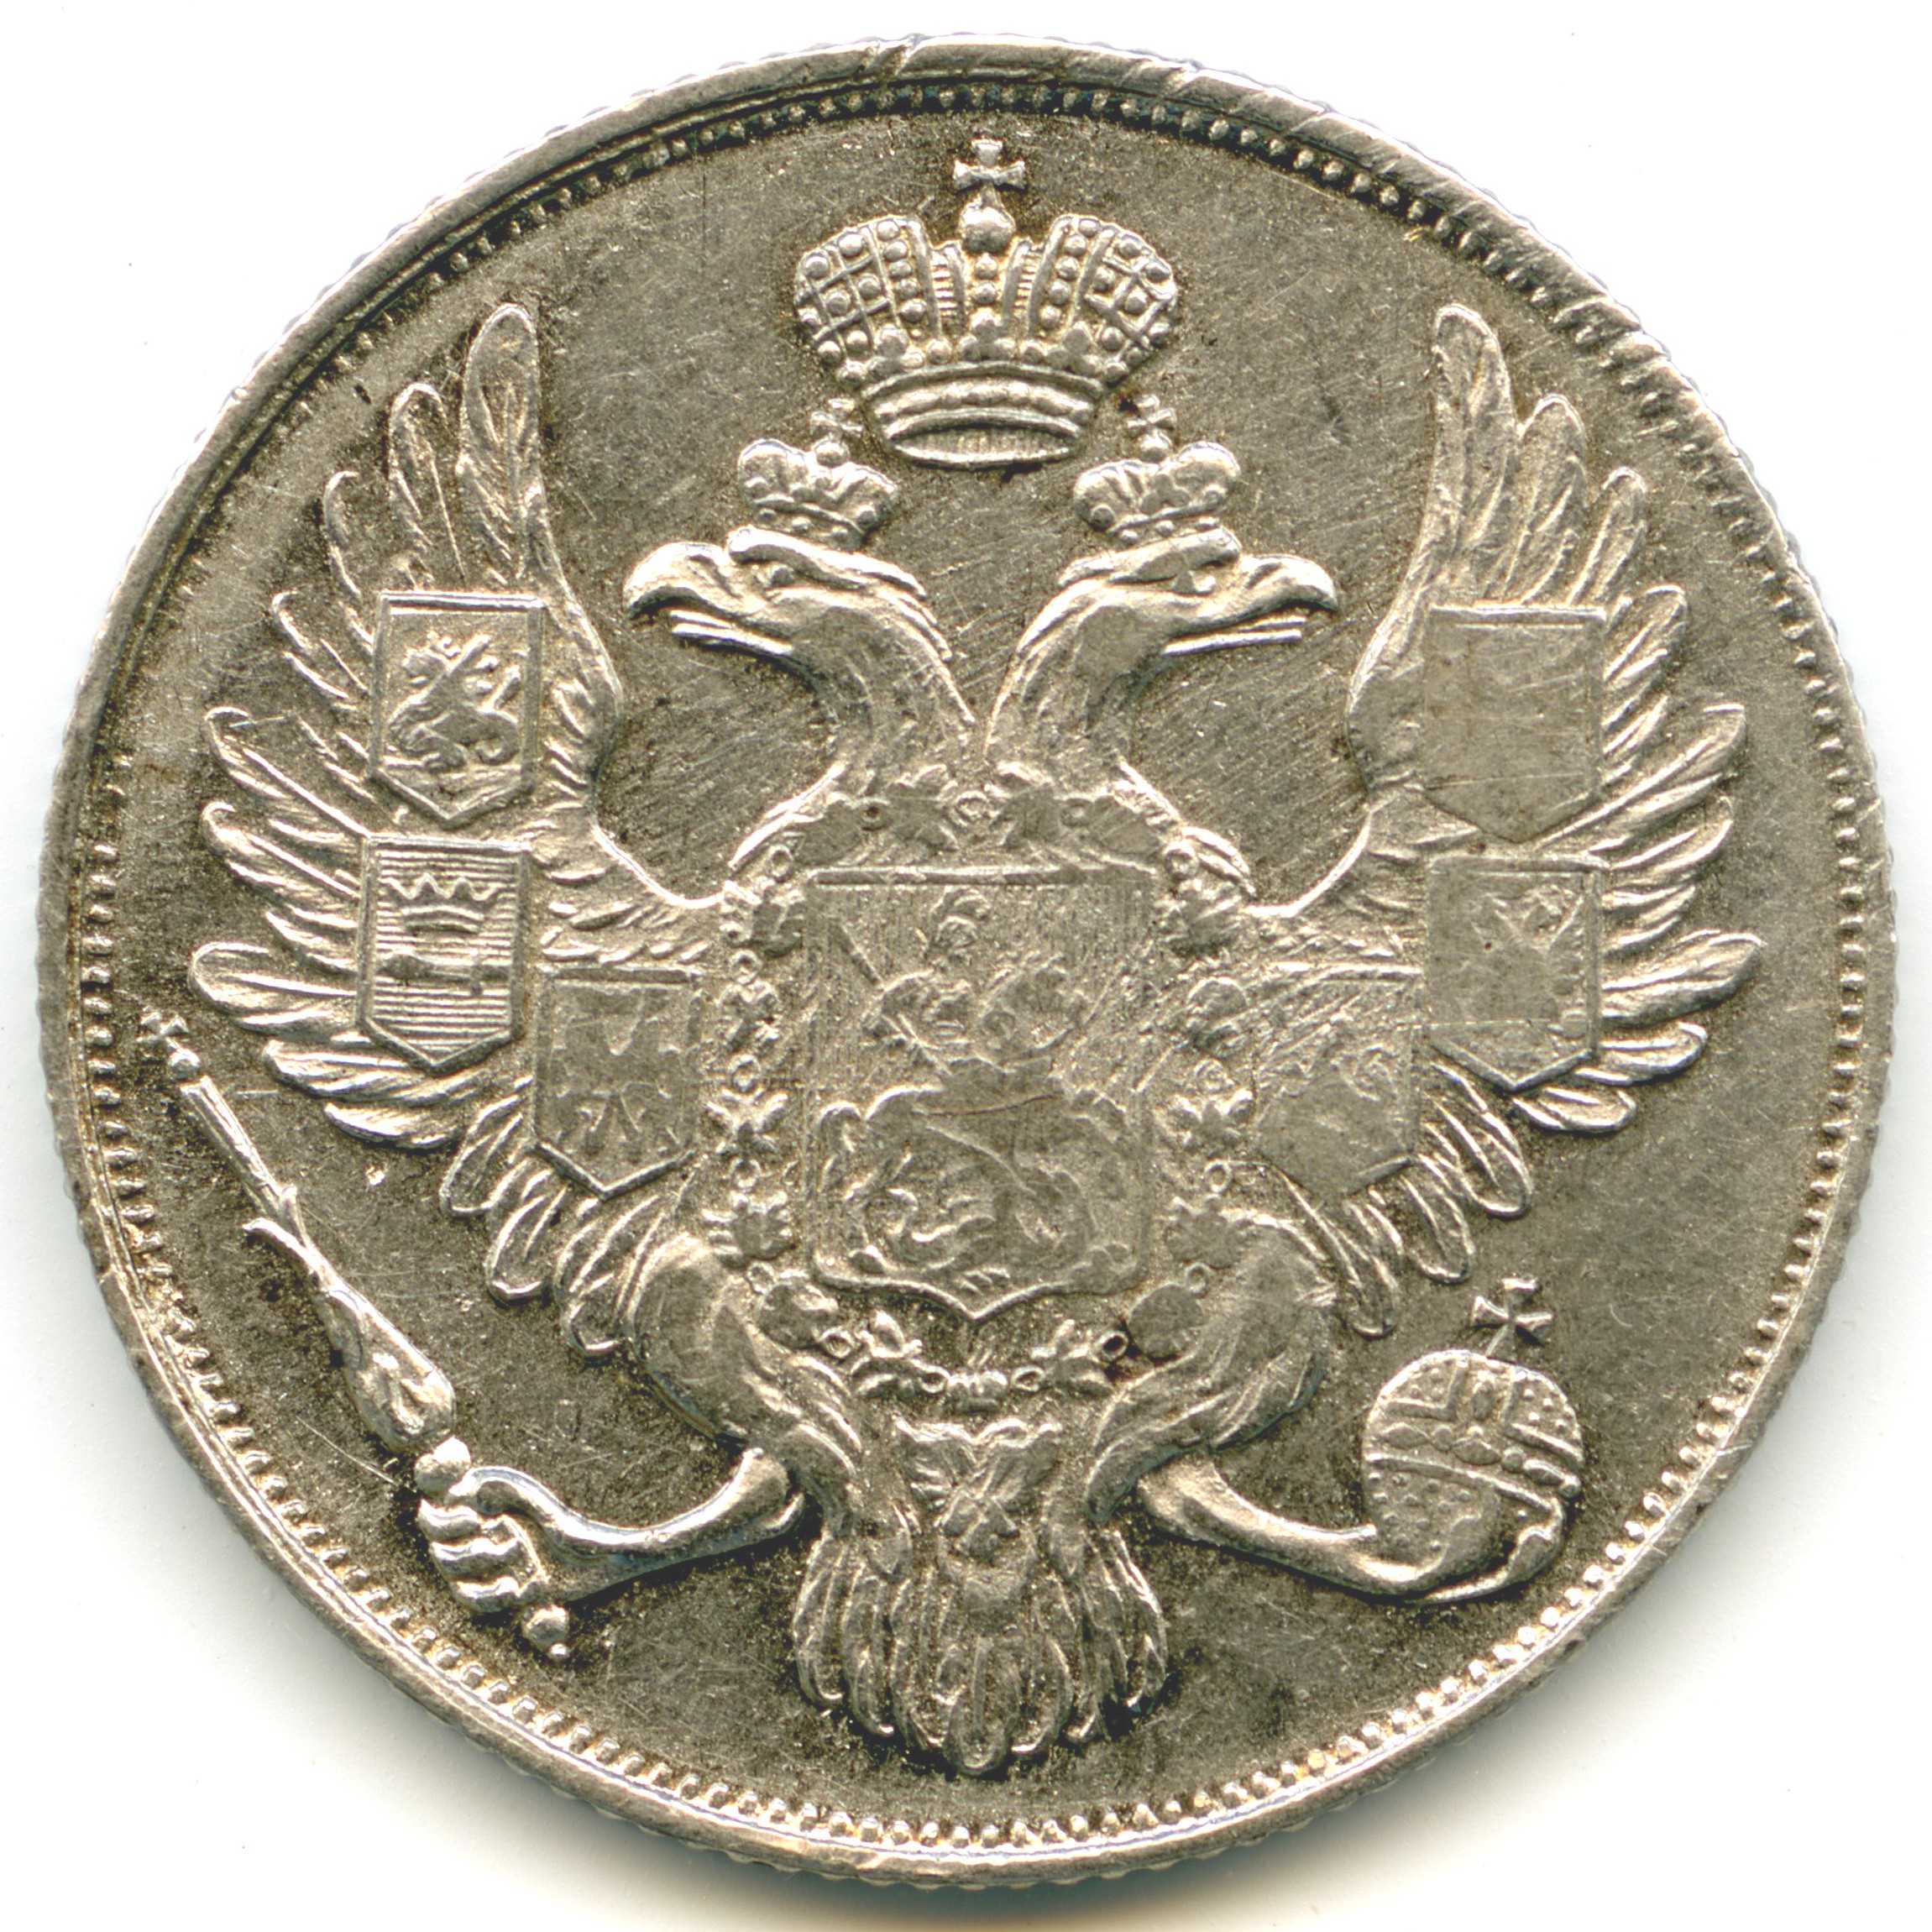 Russie - 3 Roubles - 1831 revers